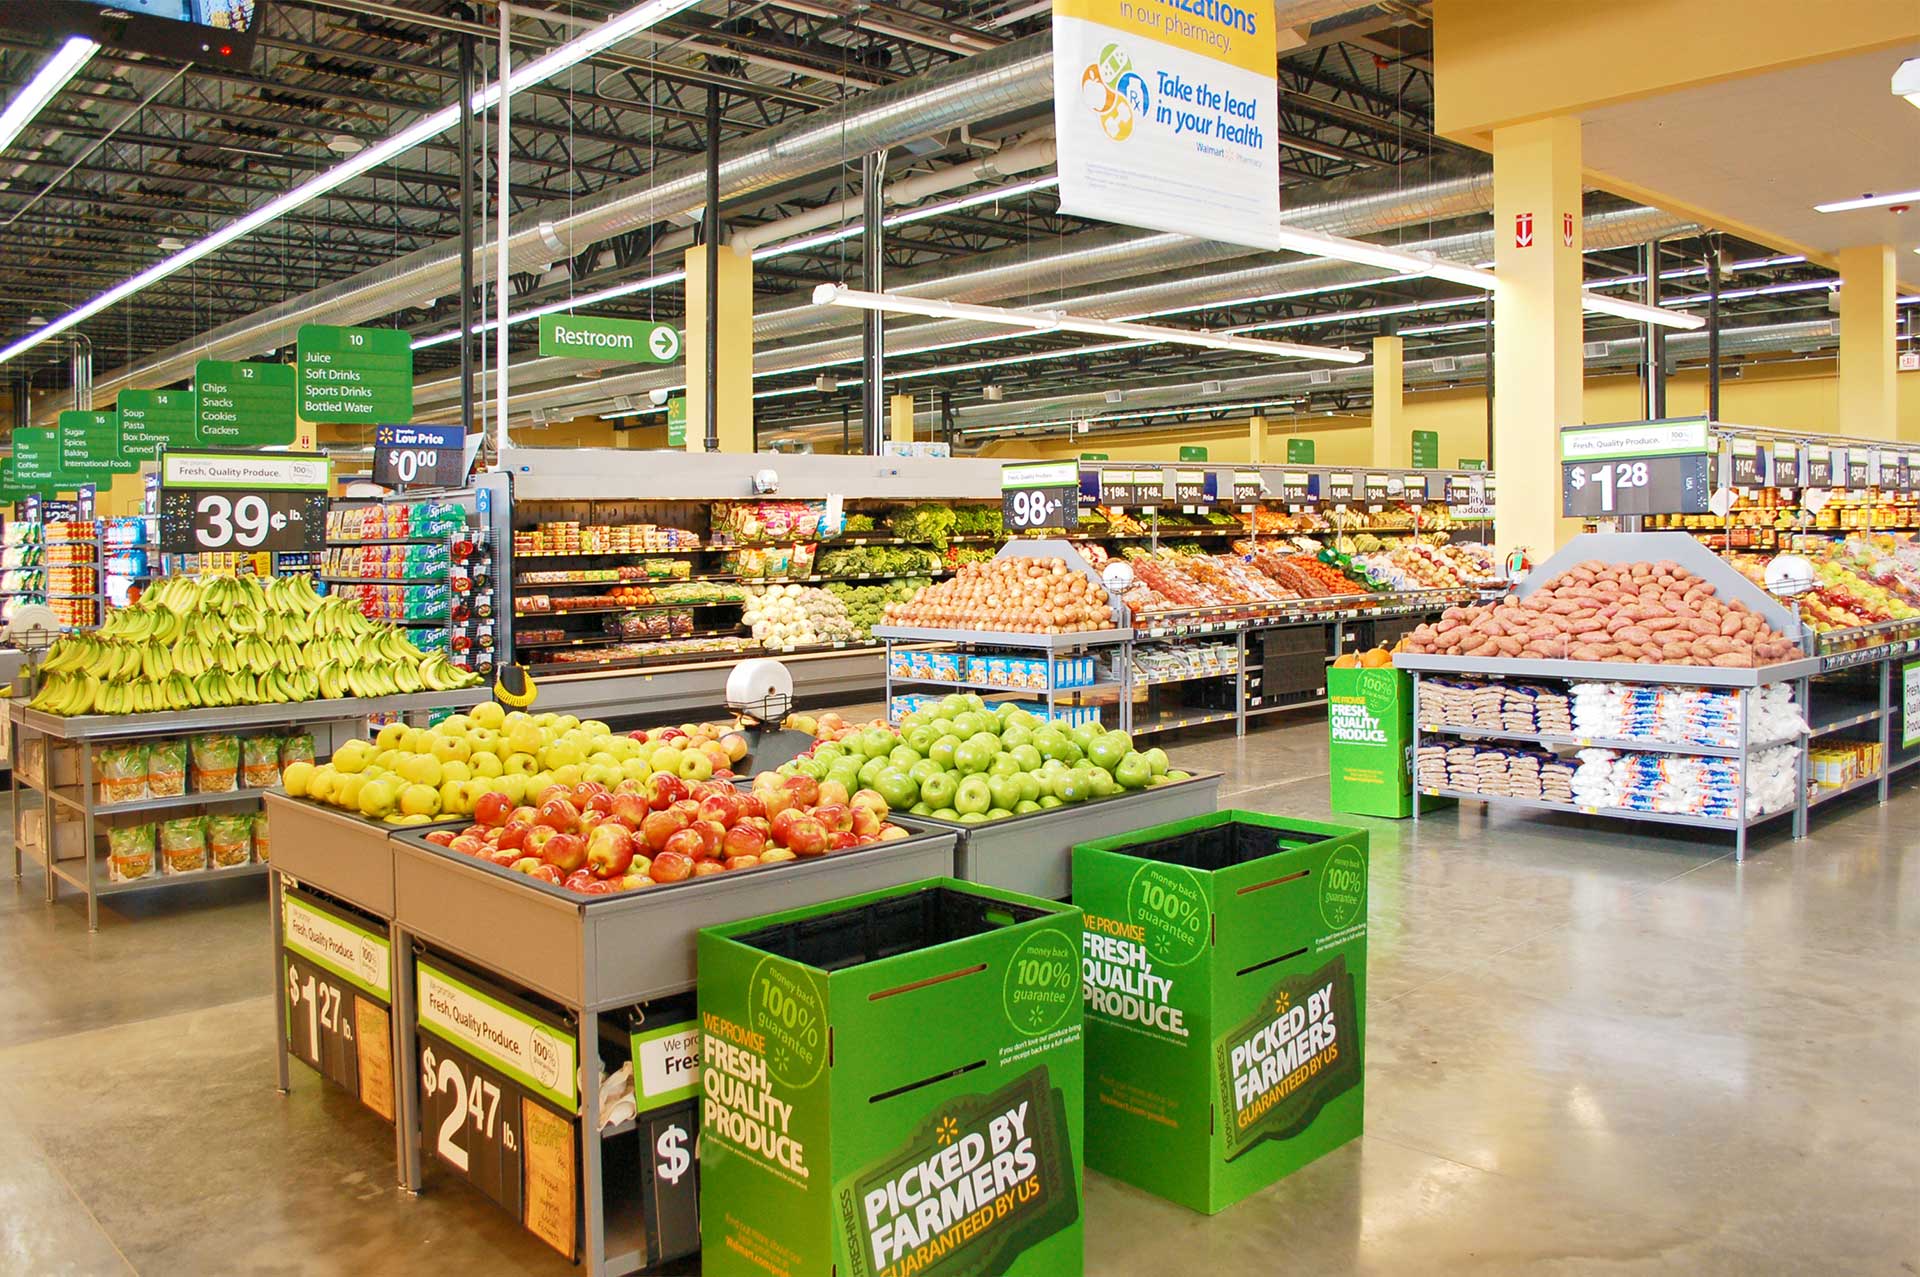 Walmart Neighborhood Market at The Shops and Lofts at 47 in Chicago, Illinois